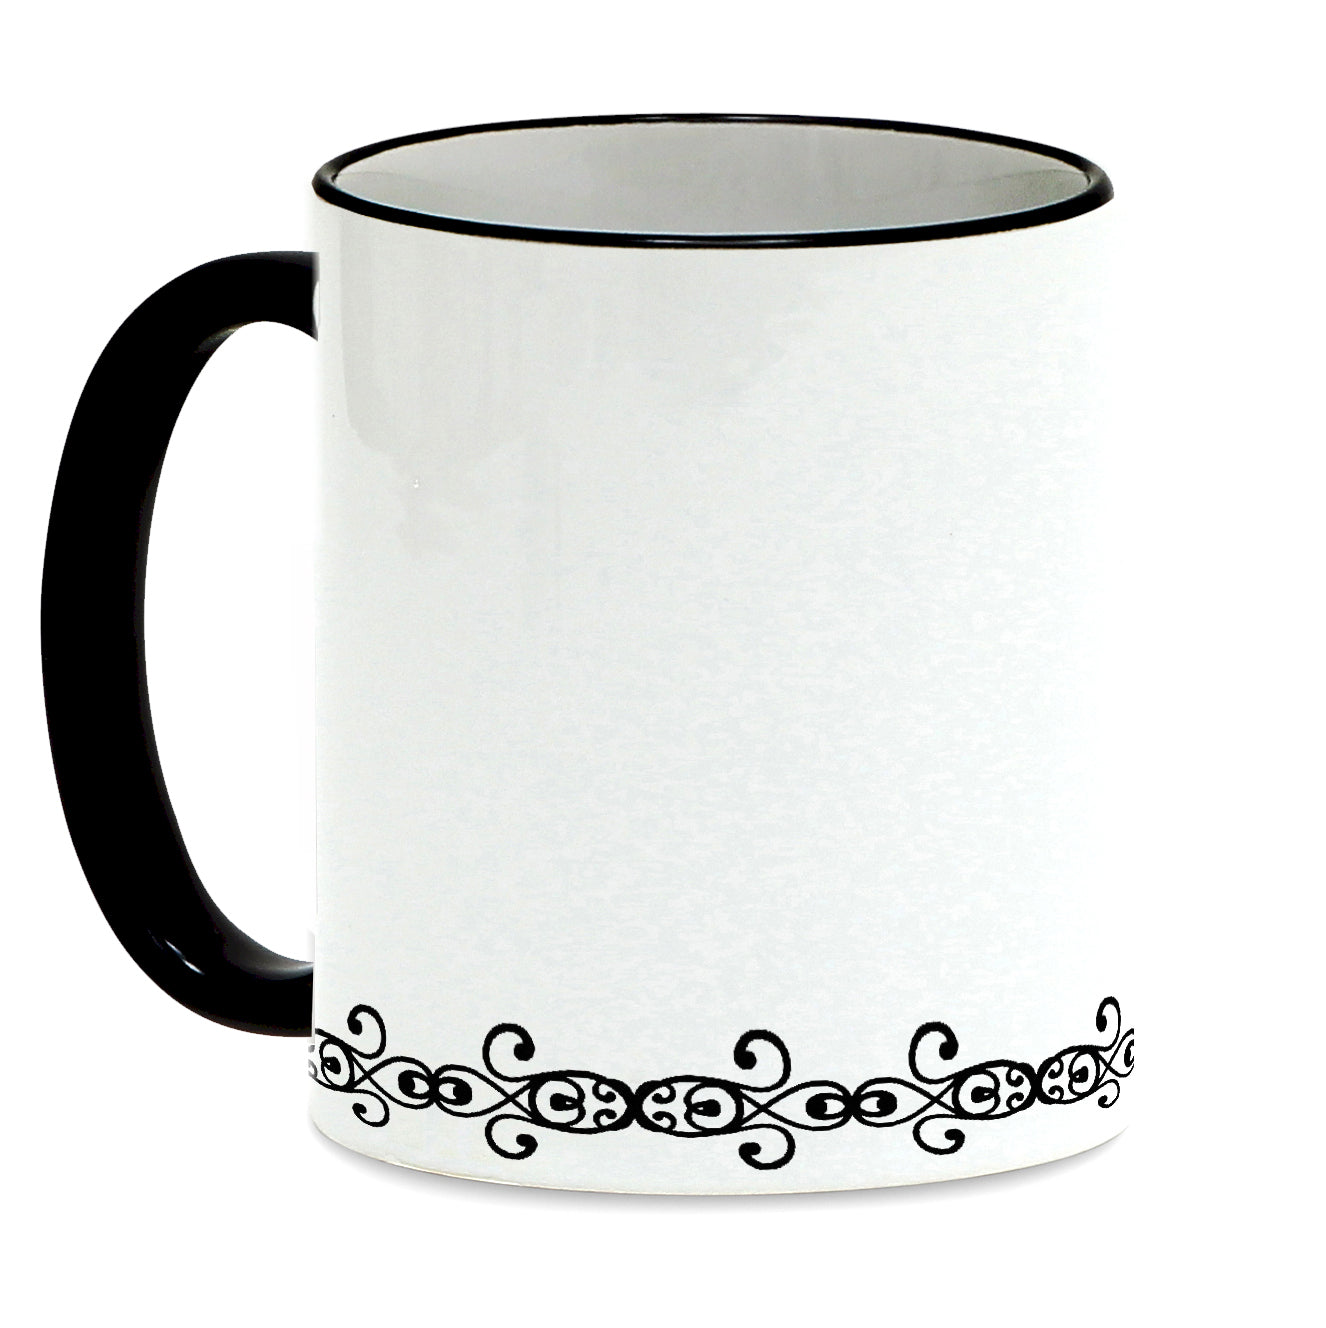 SUBLIMART: Lineart - Mug with black handle and rim featuring hand drawn line drawings. (Design #23)